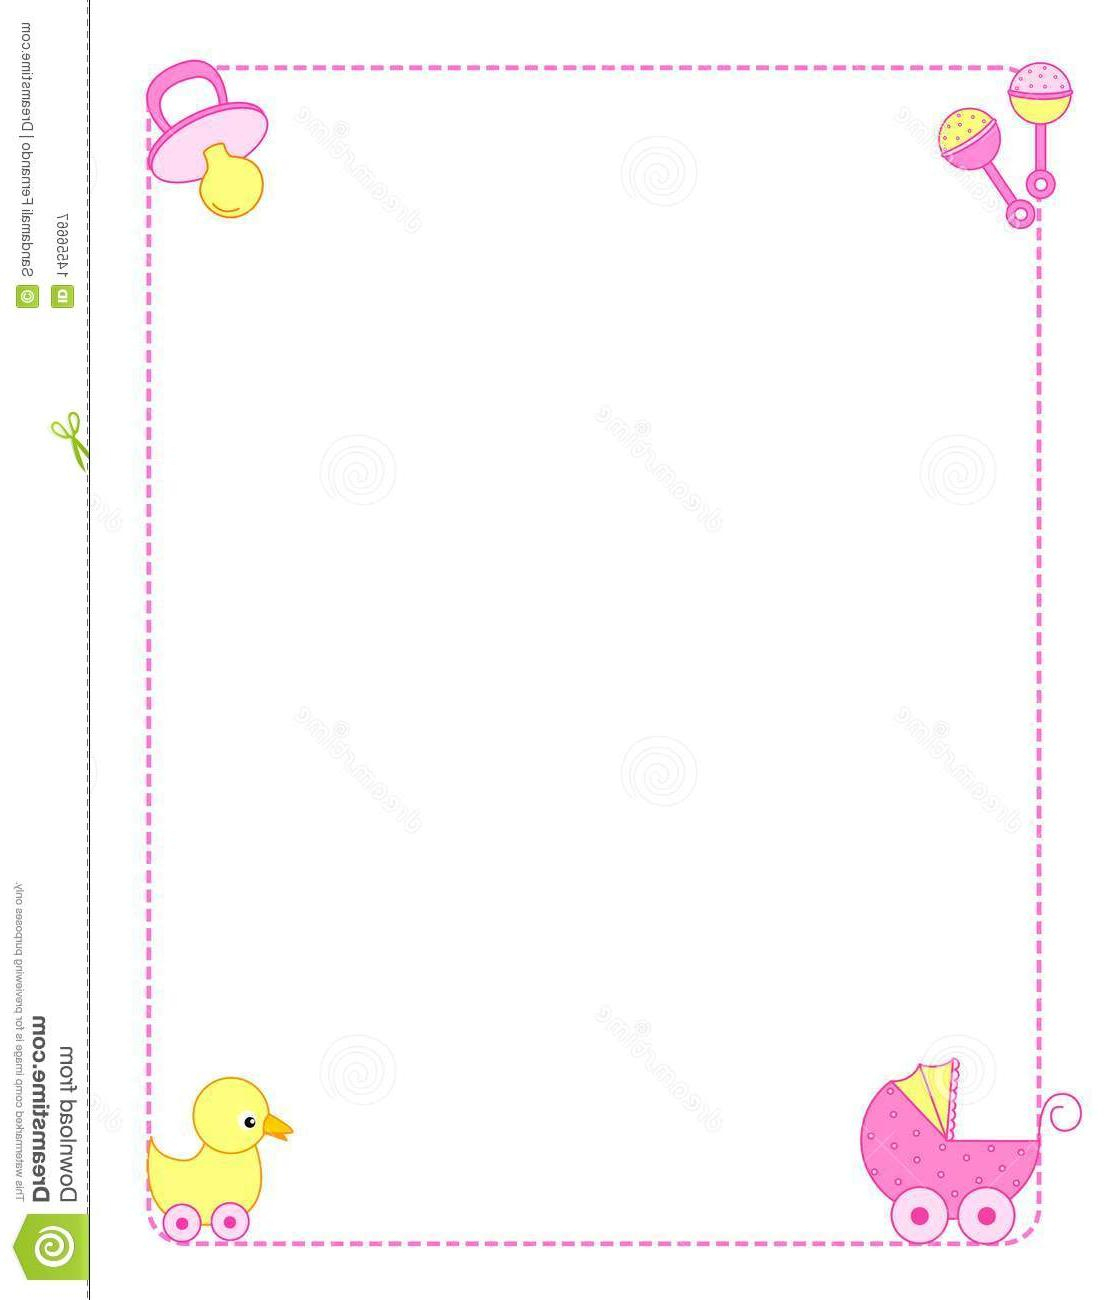 Best Free Printable Baby Borders For Paper Border Clipart Pictures - Free Printable Baby Borders For Paper